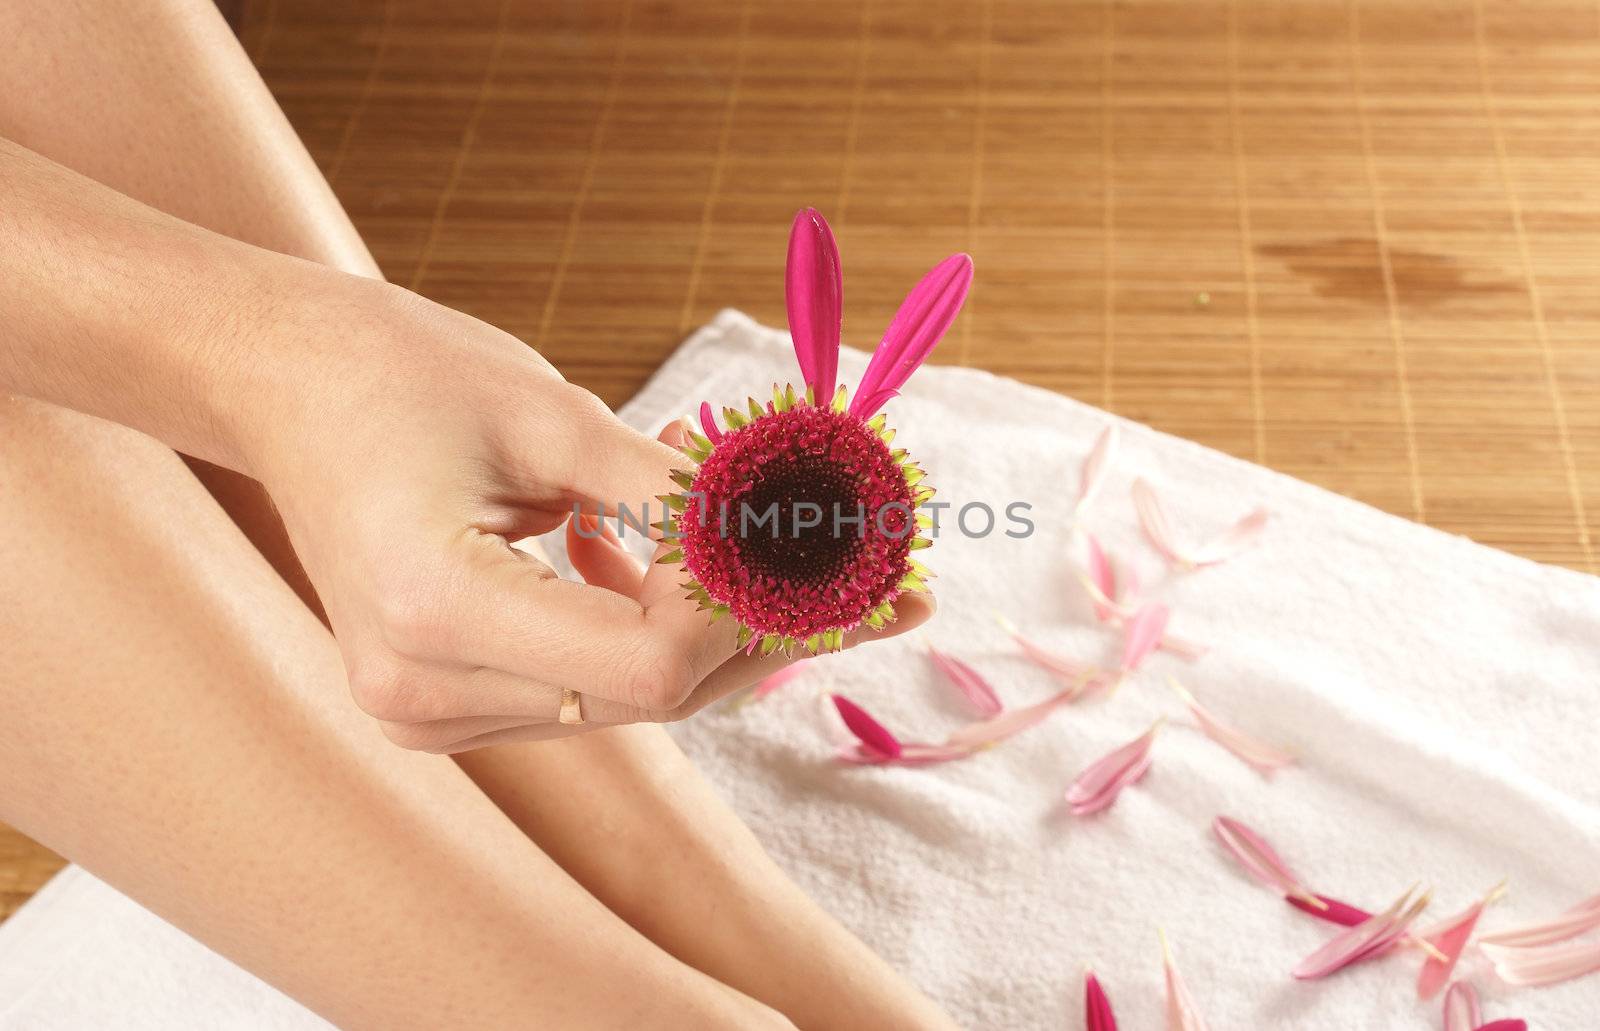 Very bstrange flower in a hand over spa background       